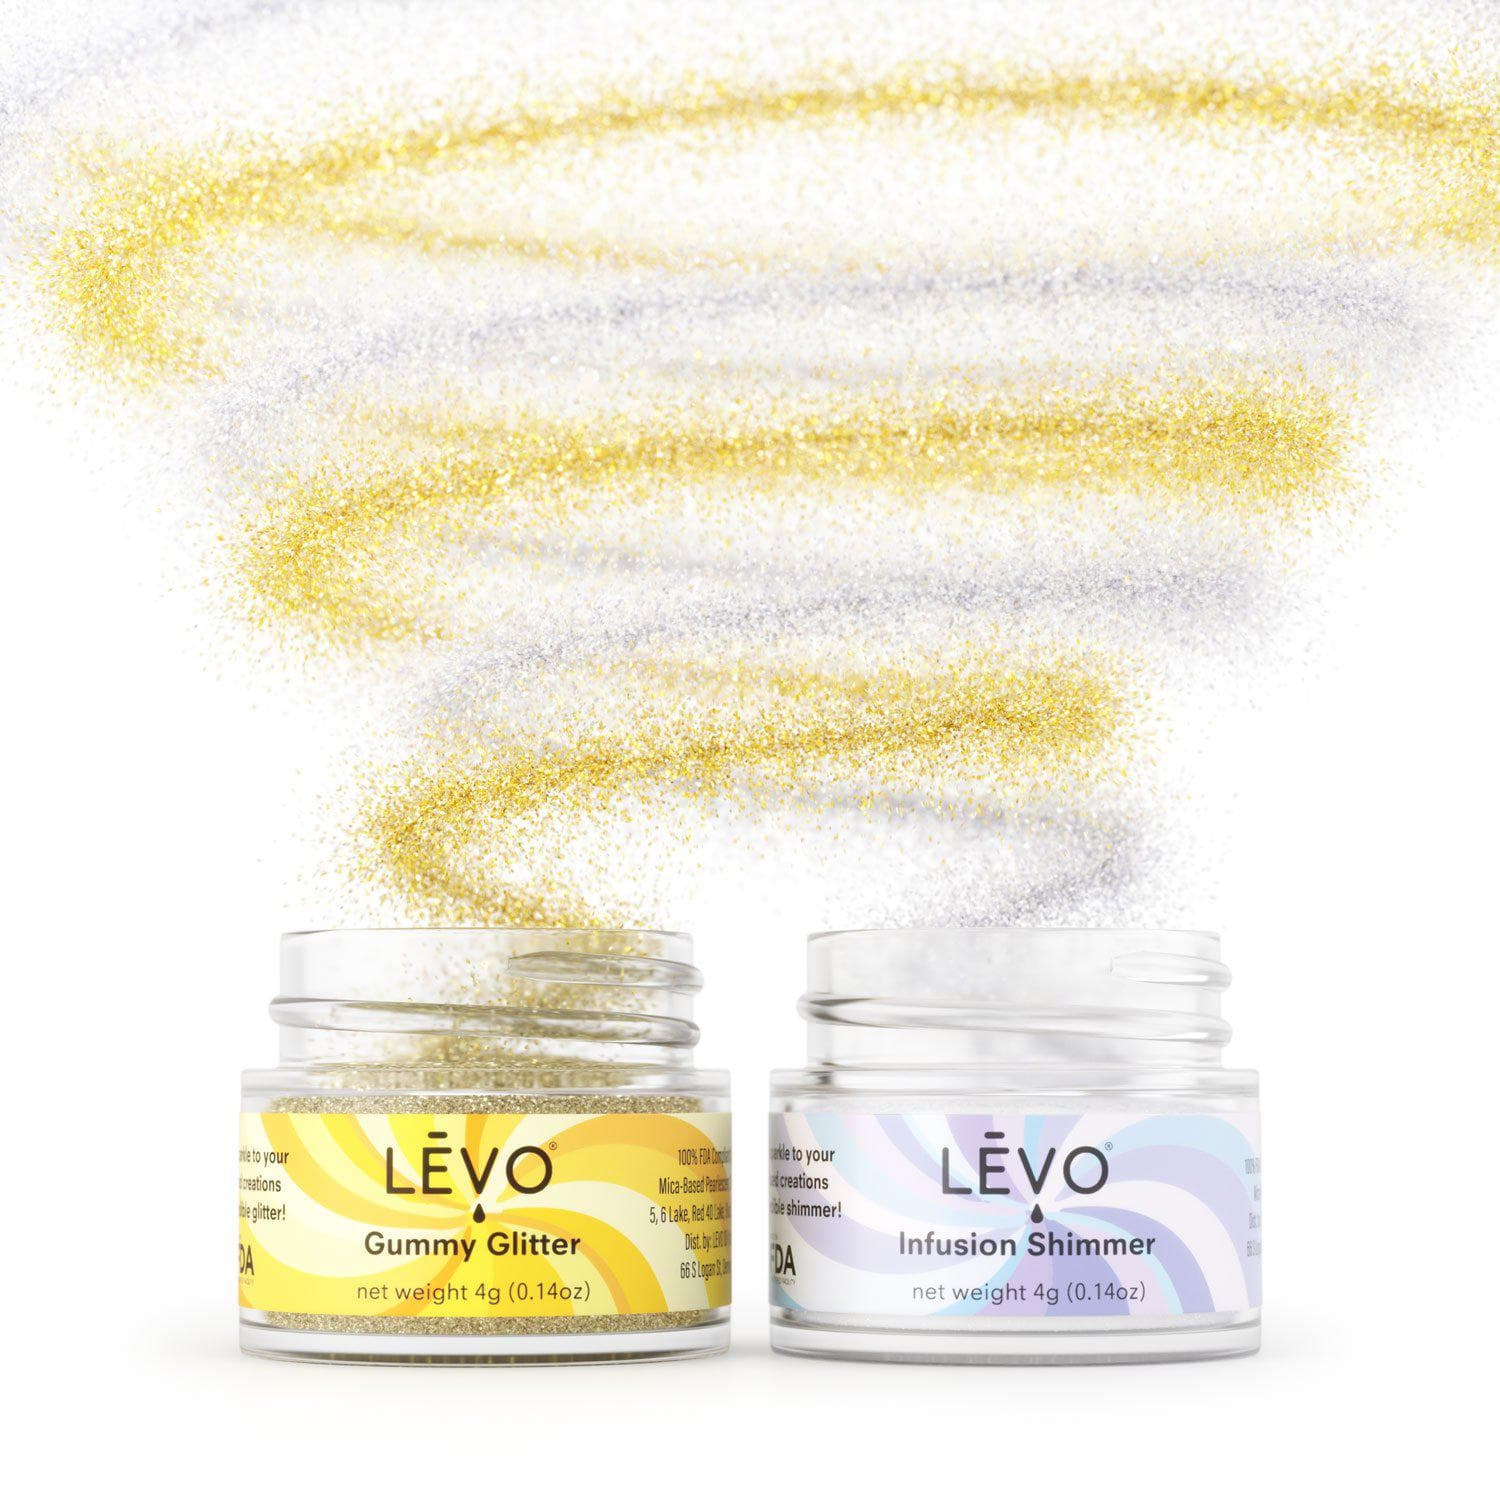 Gummy Edibles Making Kit with LĒVO II